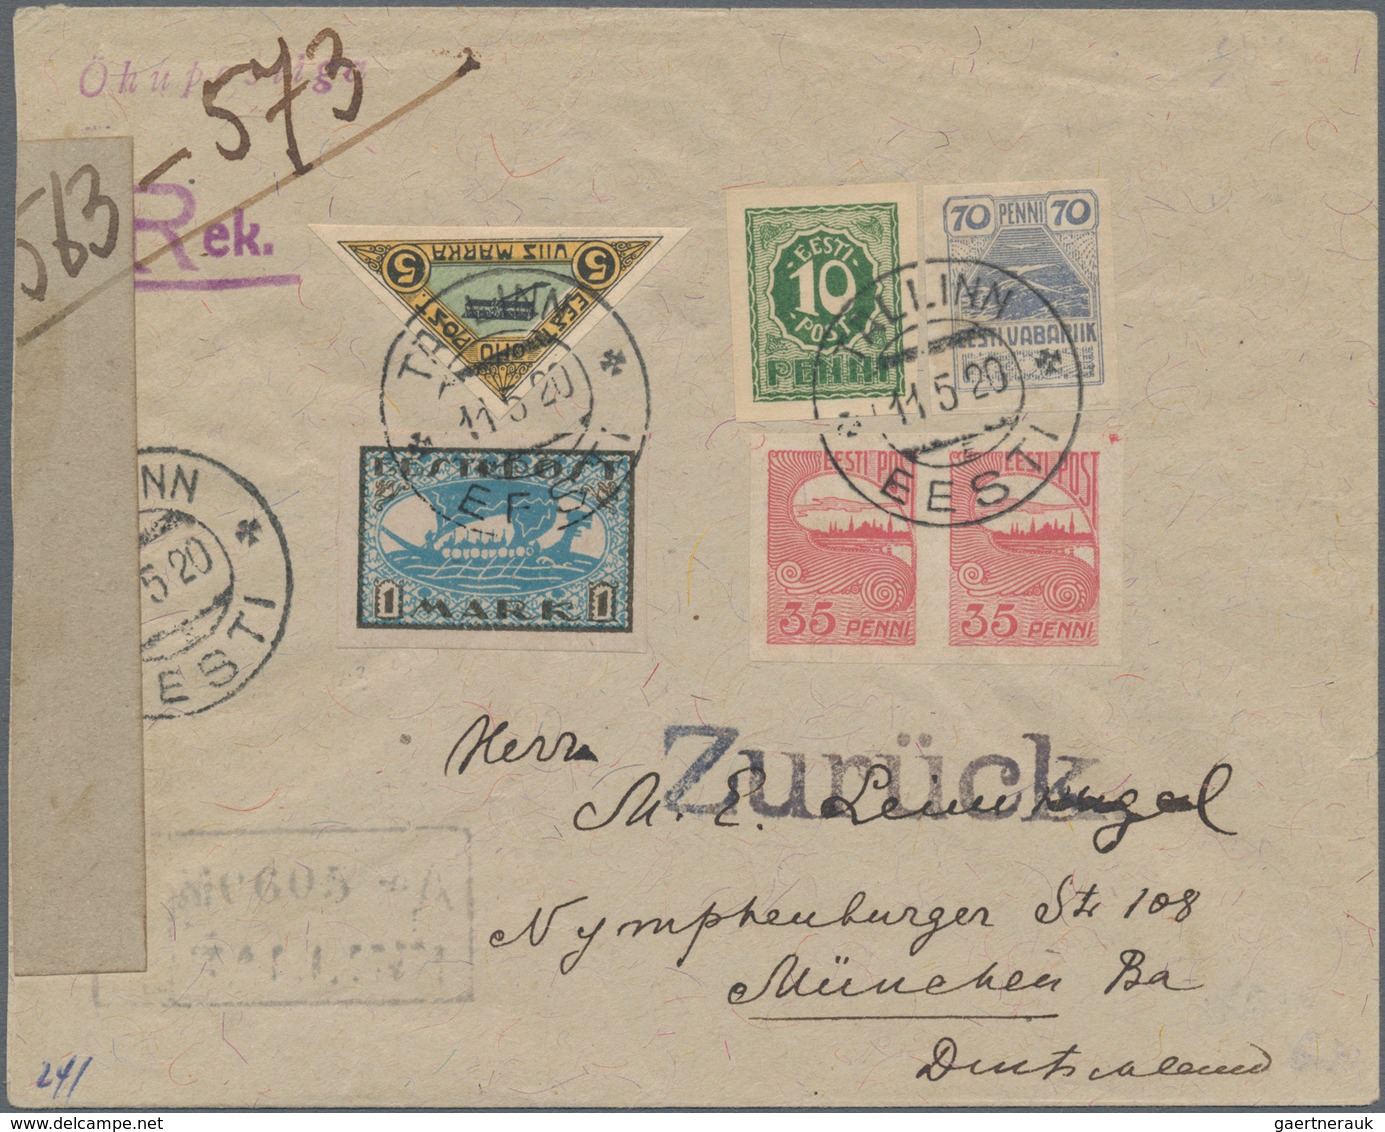 Estland: 1920. Registered Airmail Letter To Germany, Franked 10 P Green, 70 P Dull Lilac, 1 M Blue A - Estland